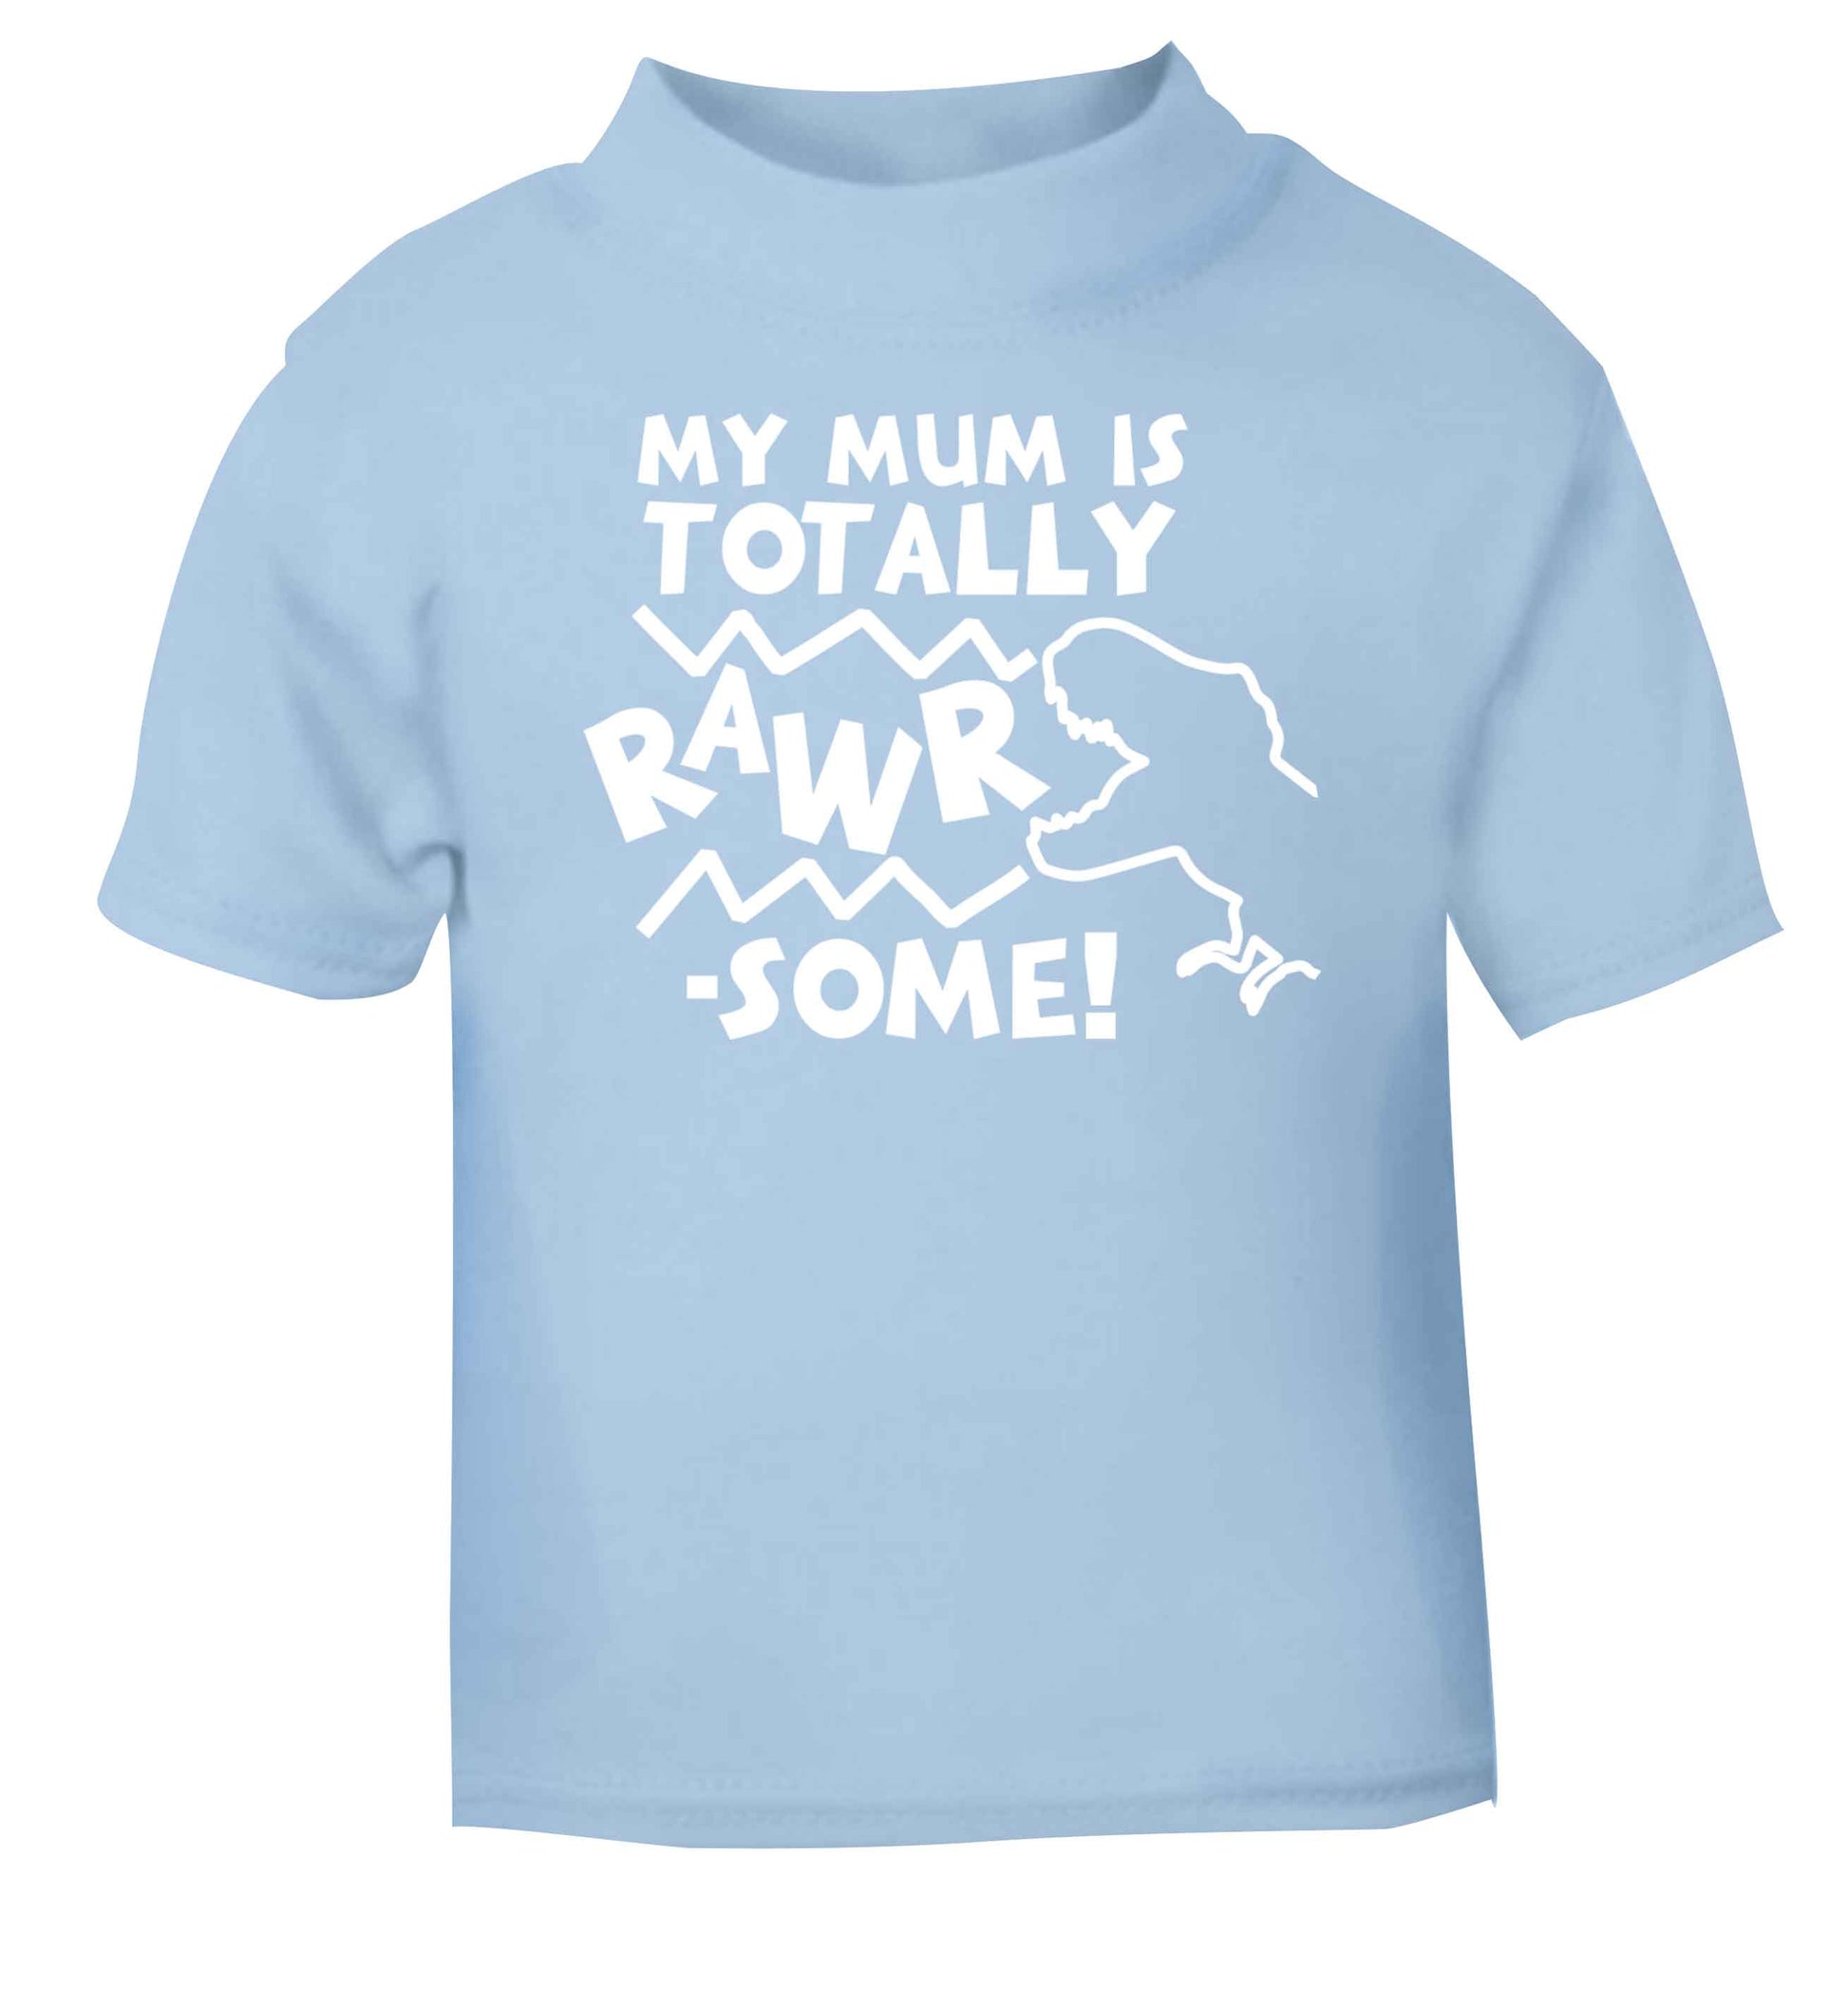 My mum is totally rawrsome light blue baby toddler Tshirt 2 Years